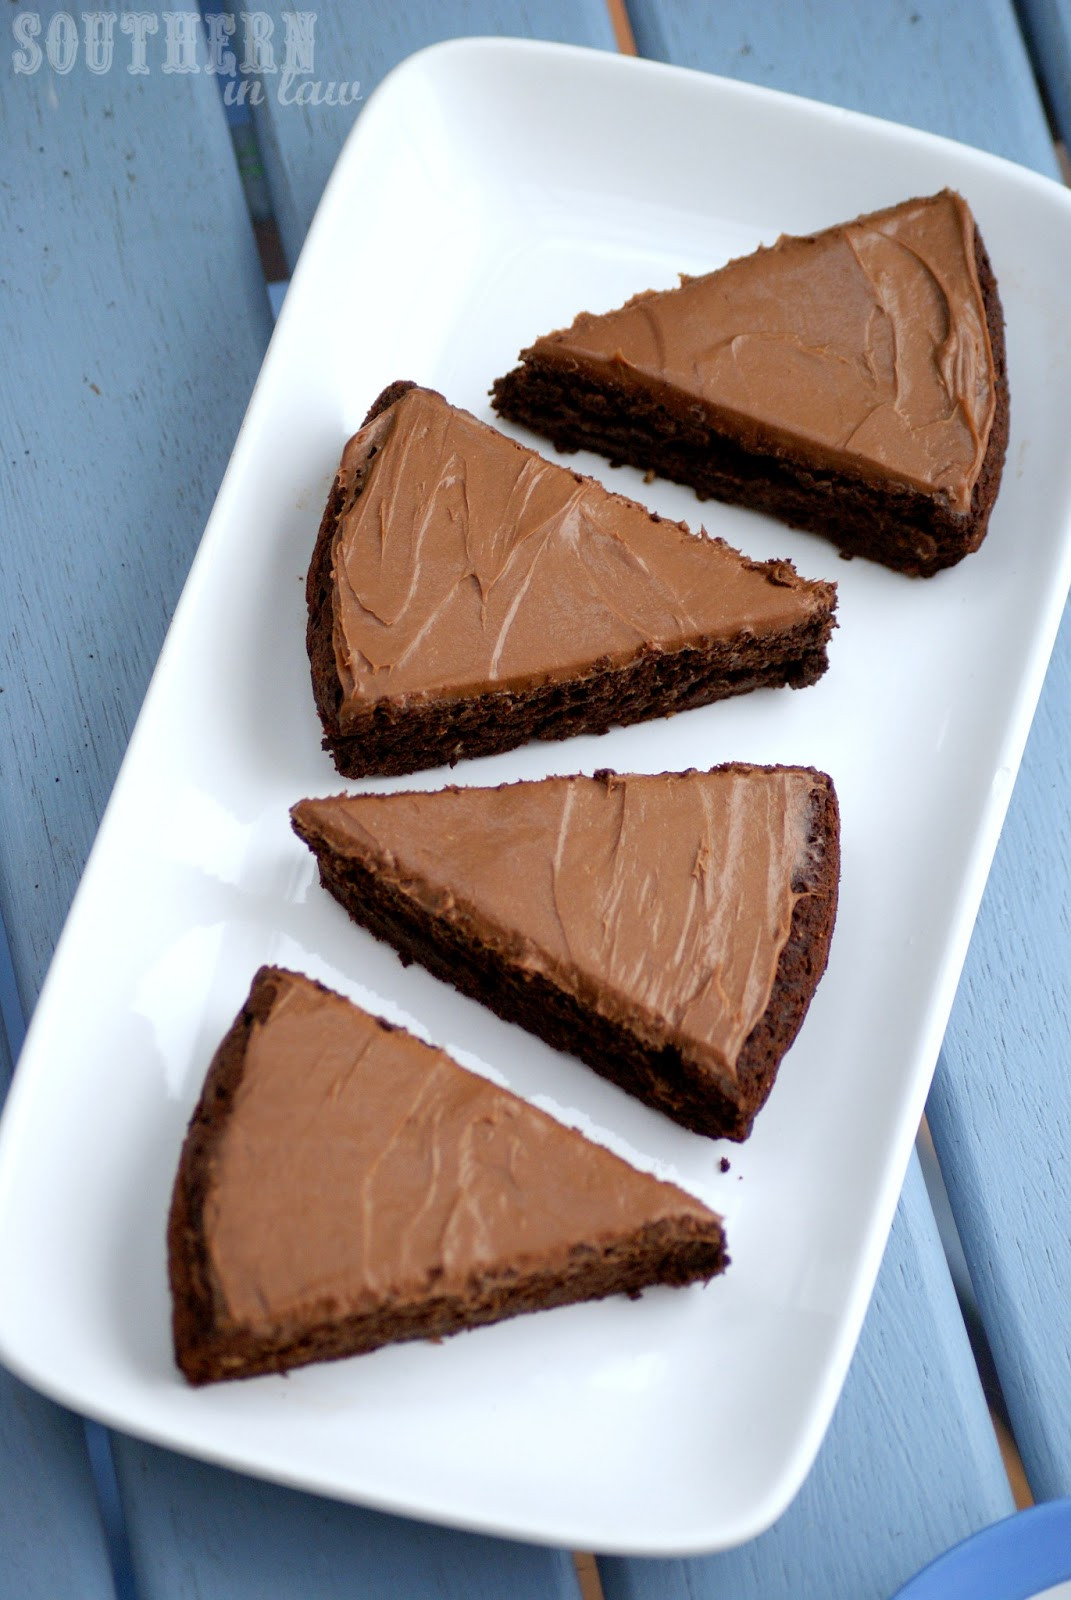 Healthy Chocolate Cake
 Southern In Law Recipe Healthy Chocolate Cake Vegan too